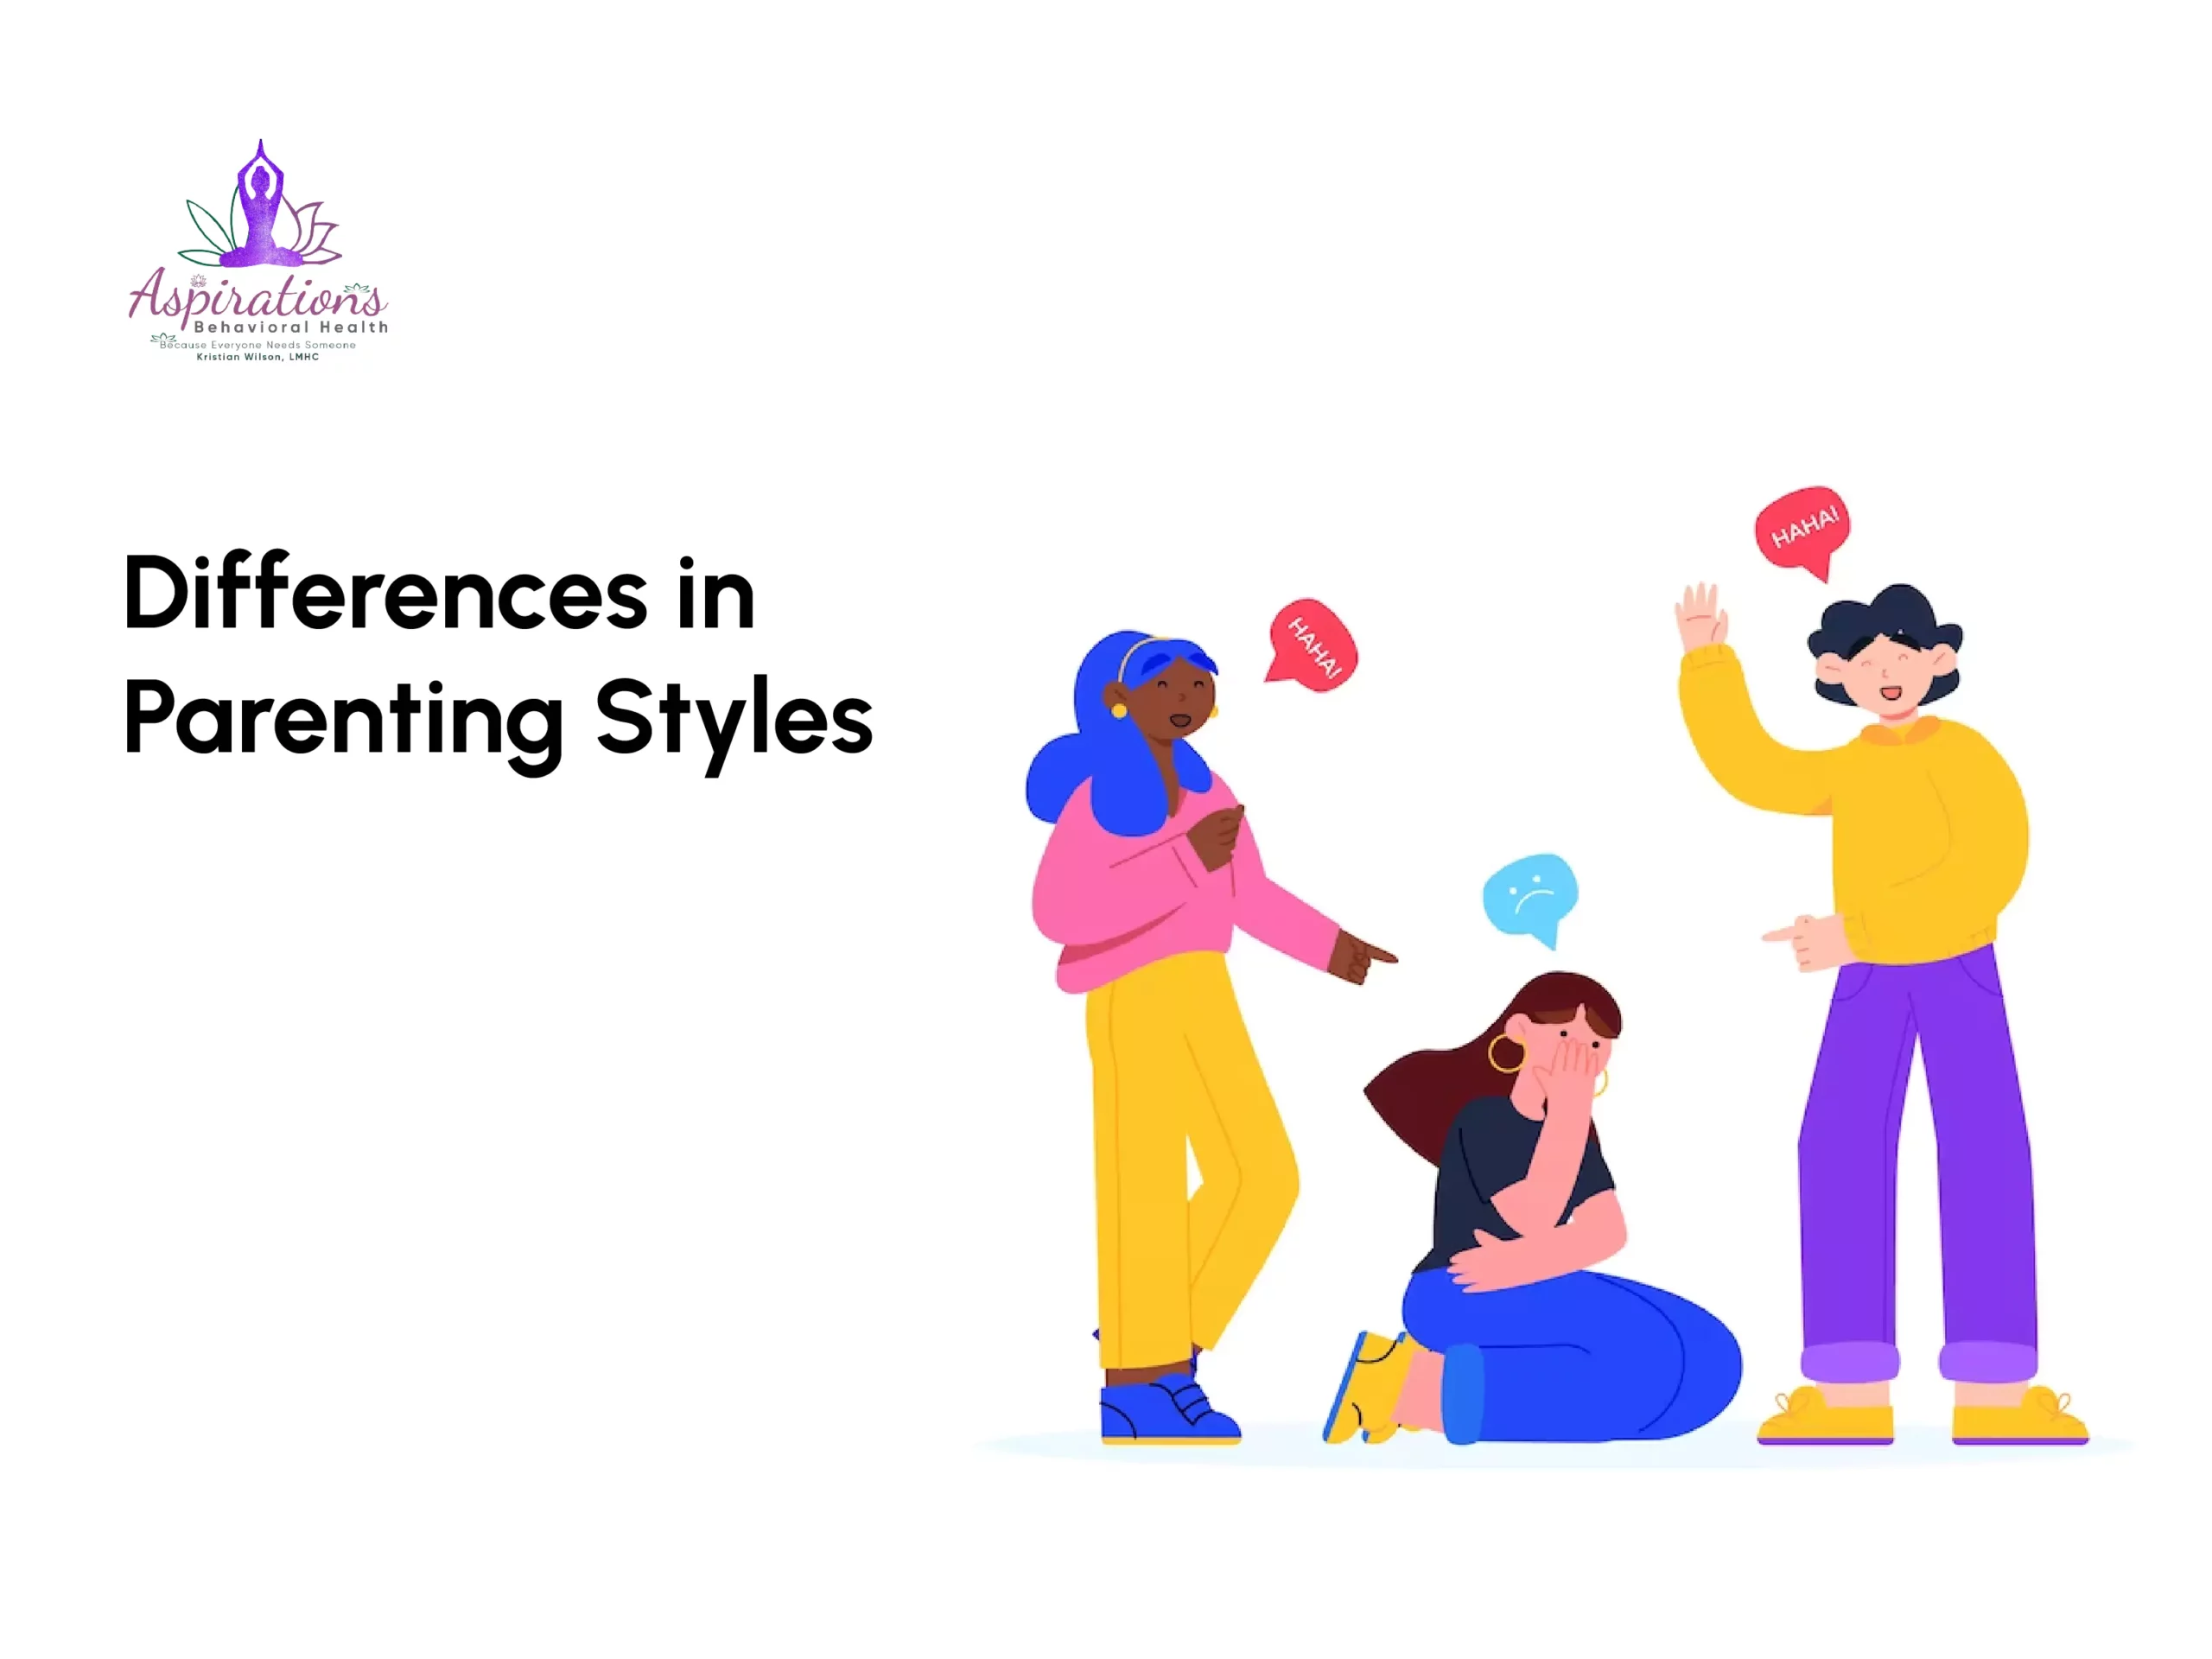 Differences in Parenting Styles